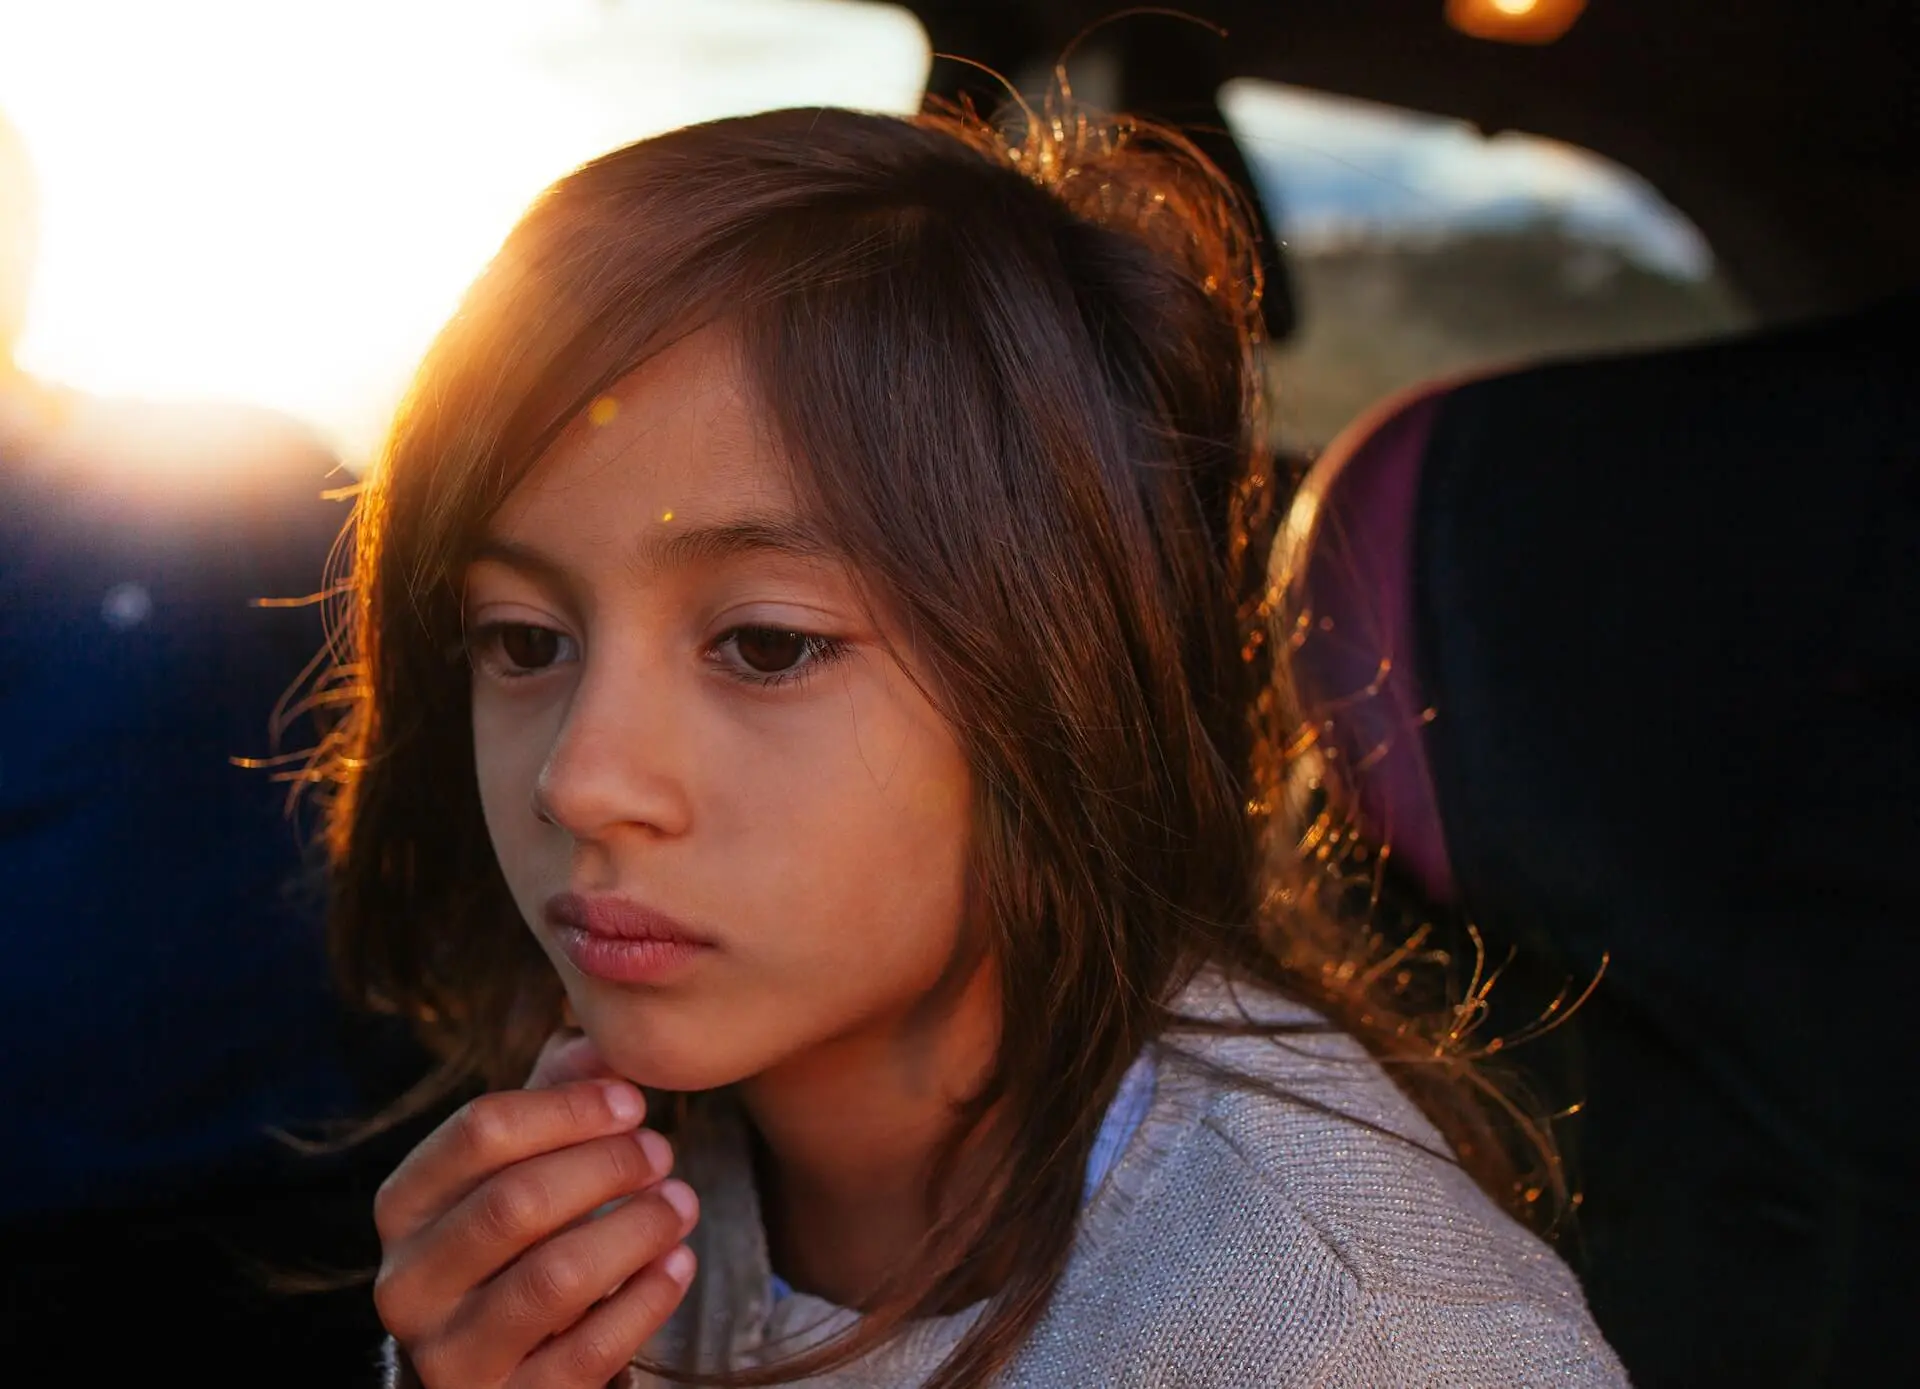 A thinking child sits in a car.